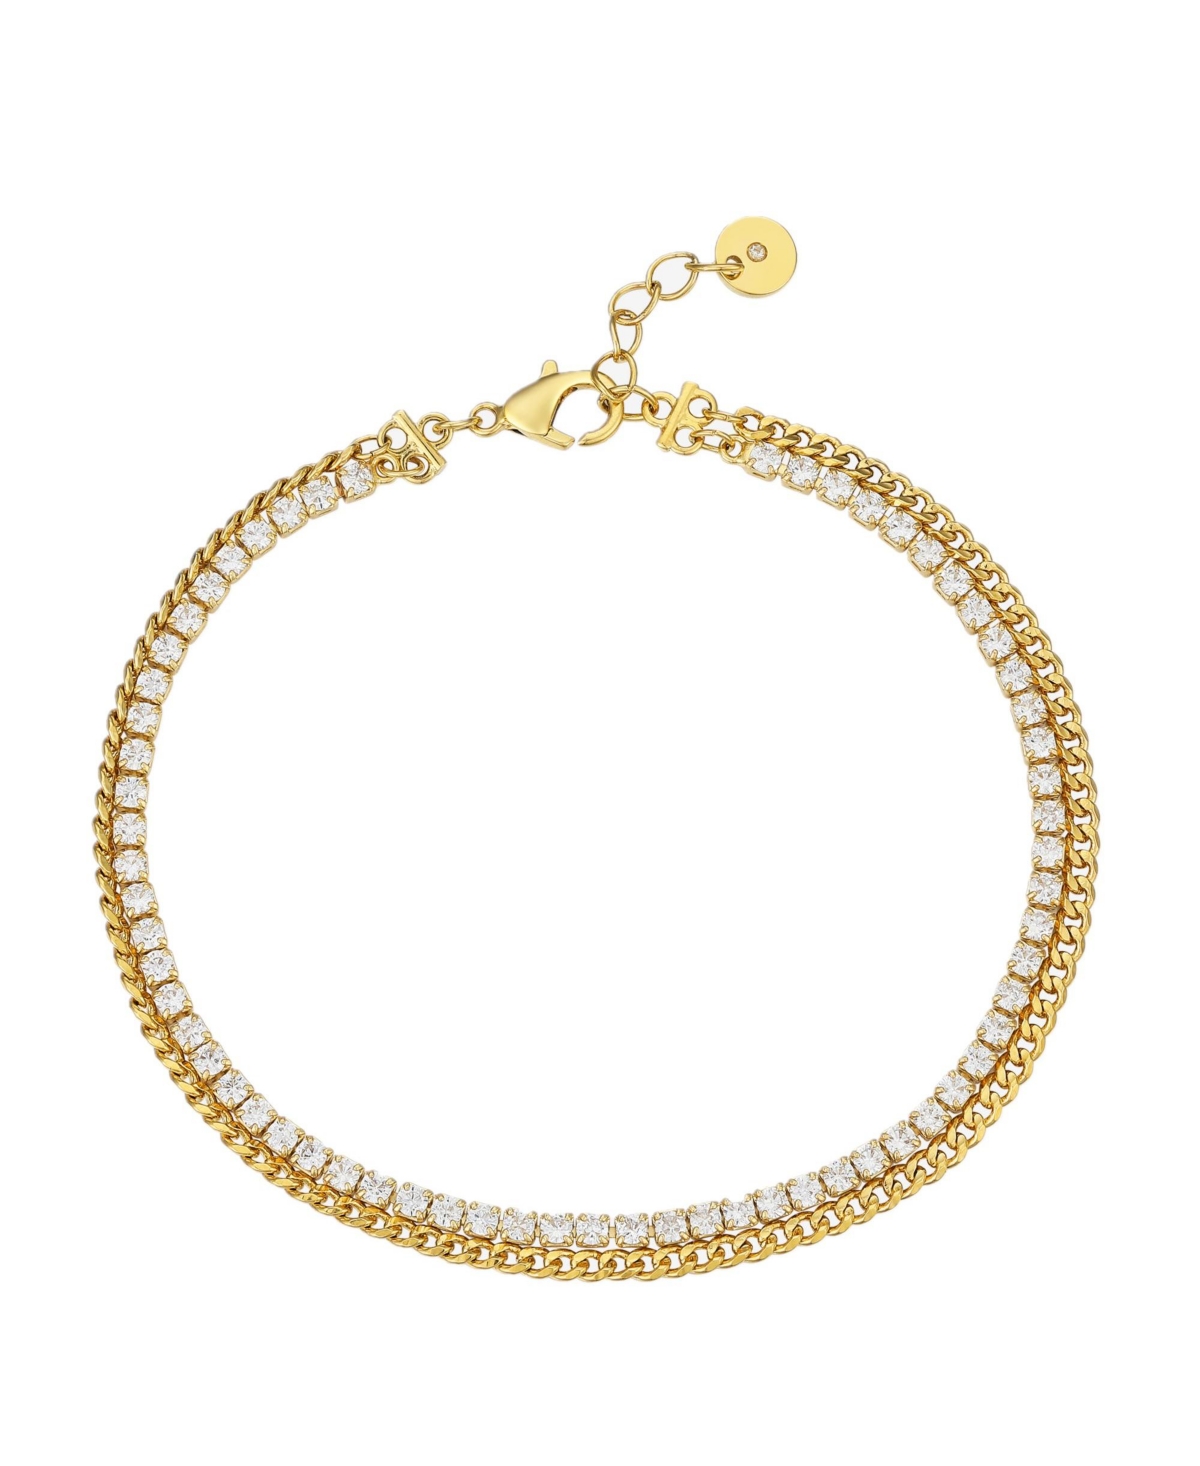 Modasport Clear Cubic Zirconia Stone And Curb Link Bracelet In Gold